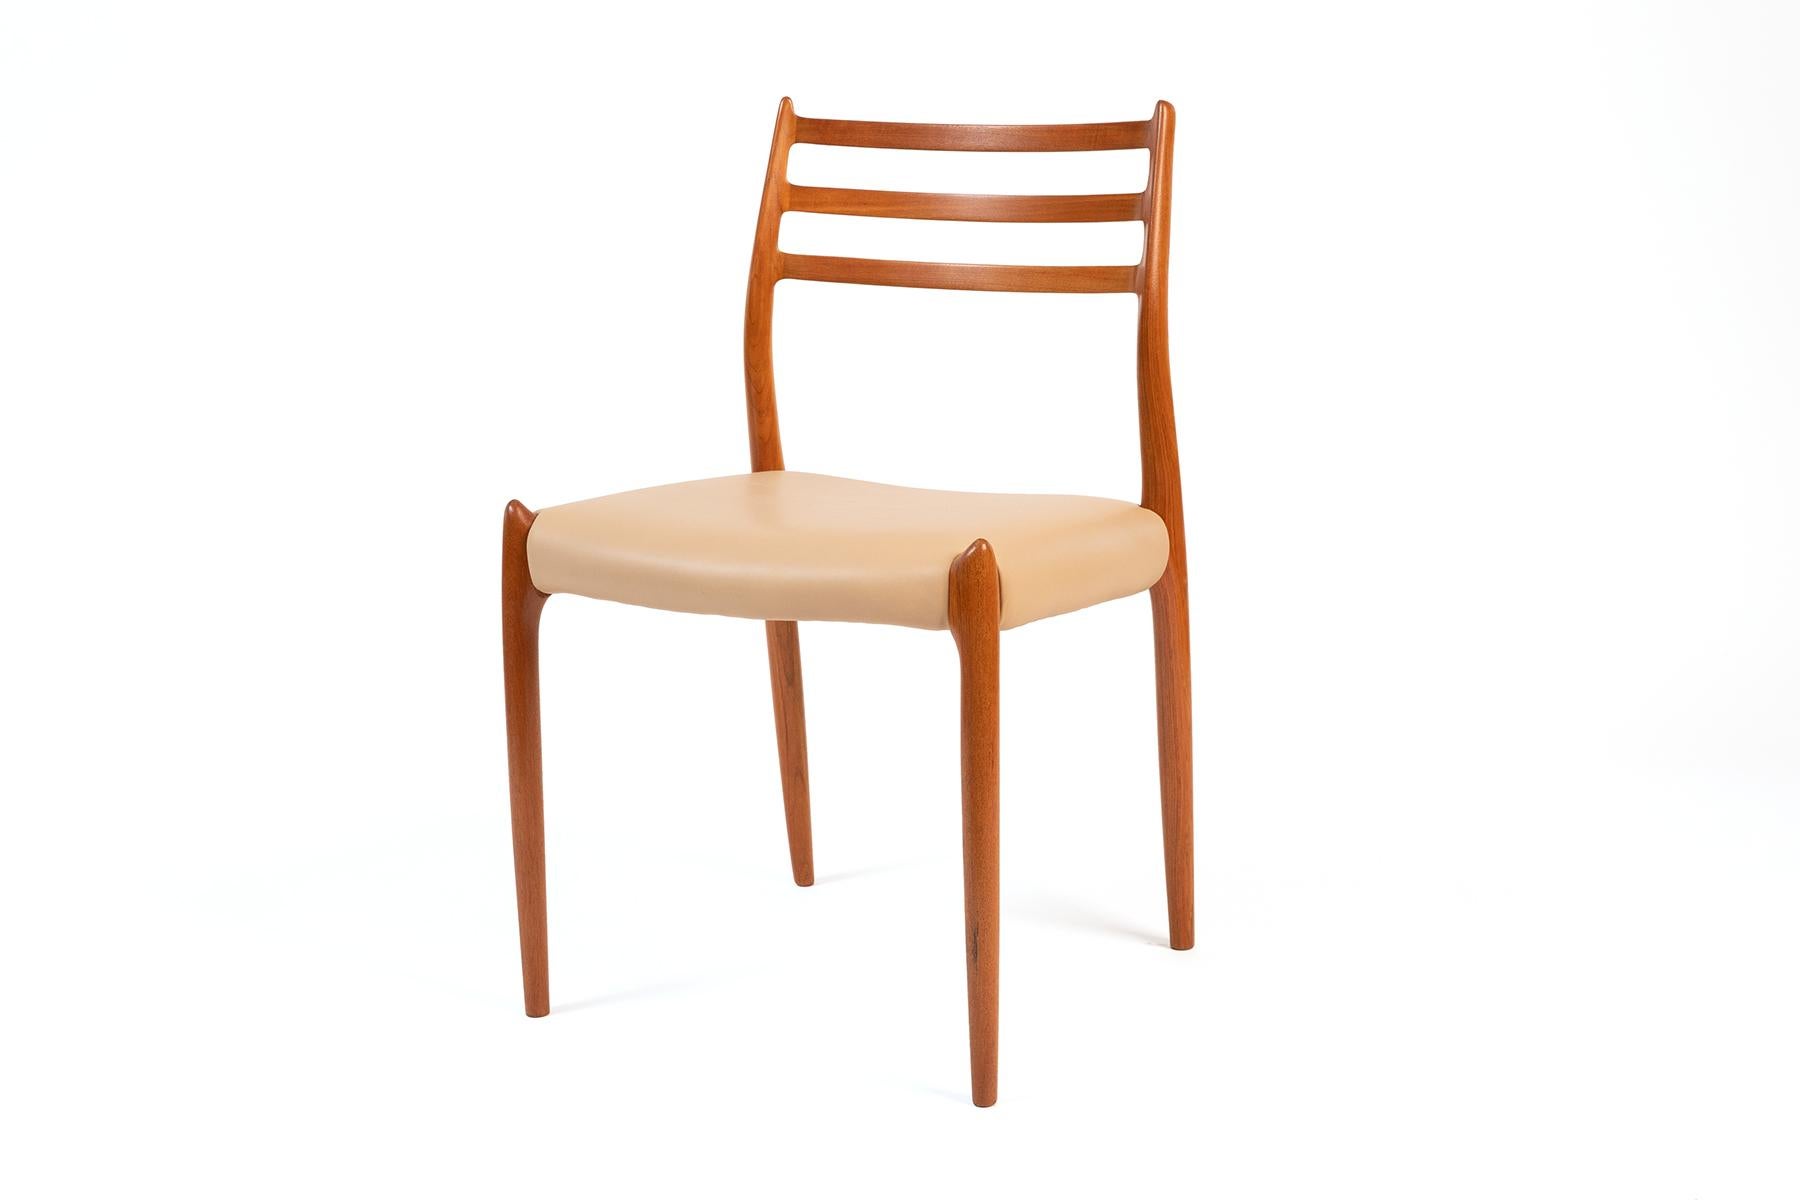 Set of four dining chairs by Niels Otto Moller for J.L. Moller, Denmark circa mid 1960's. Model 78. A stylish set of teak chairs with leather seats and sculpted ladder backs. Newly finished and upholstered. Price listed is for the set of four.